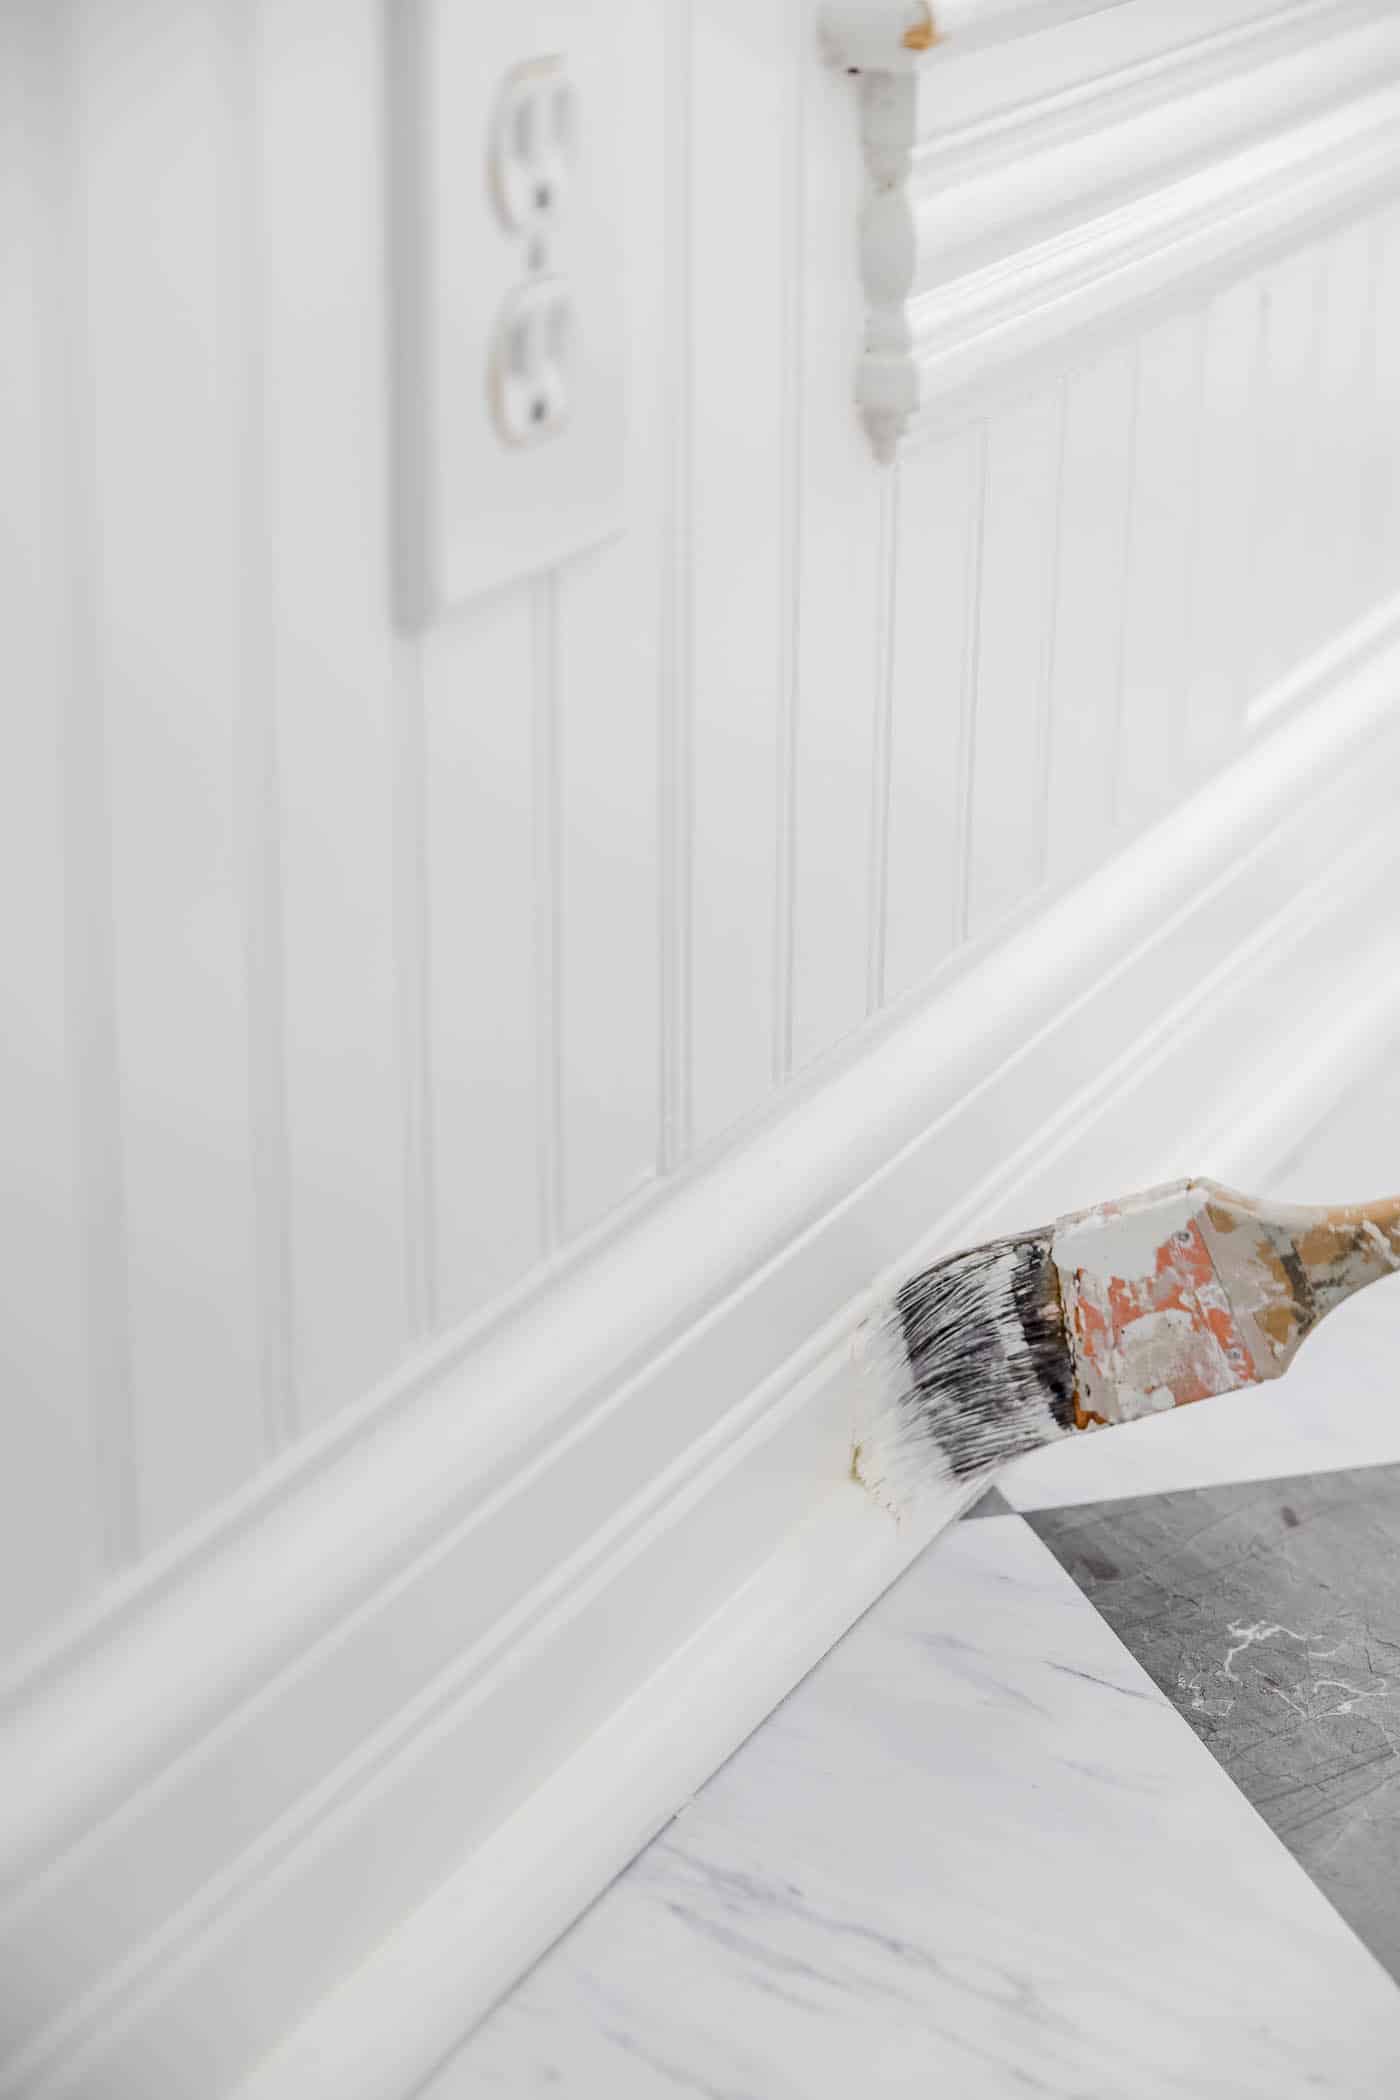 How to Paint Trim: A Step-by-Step Guide